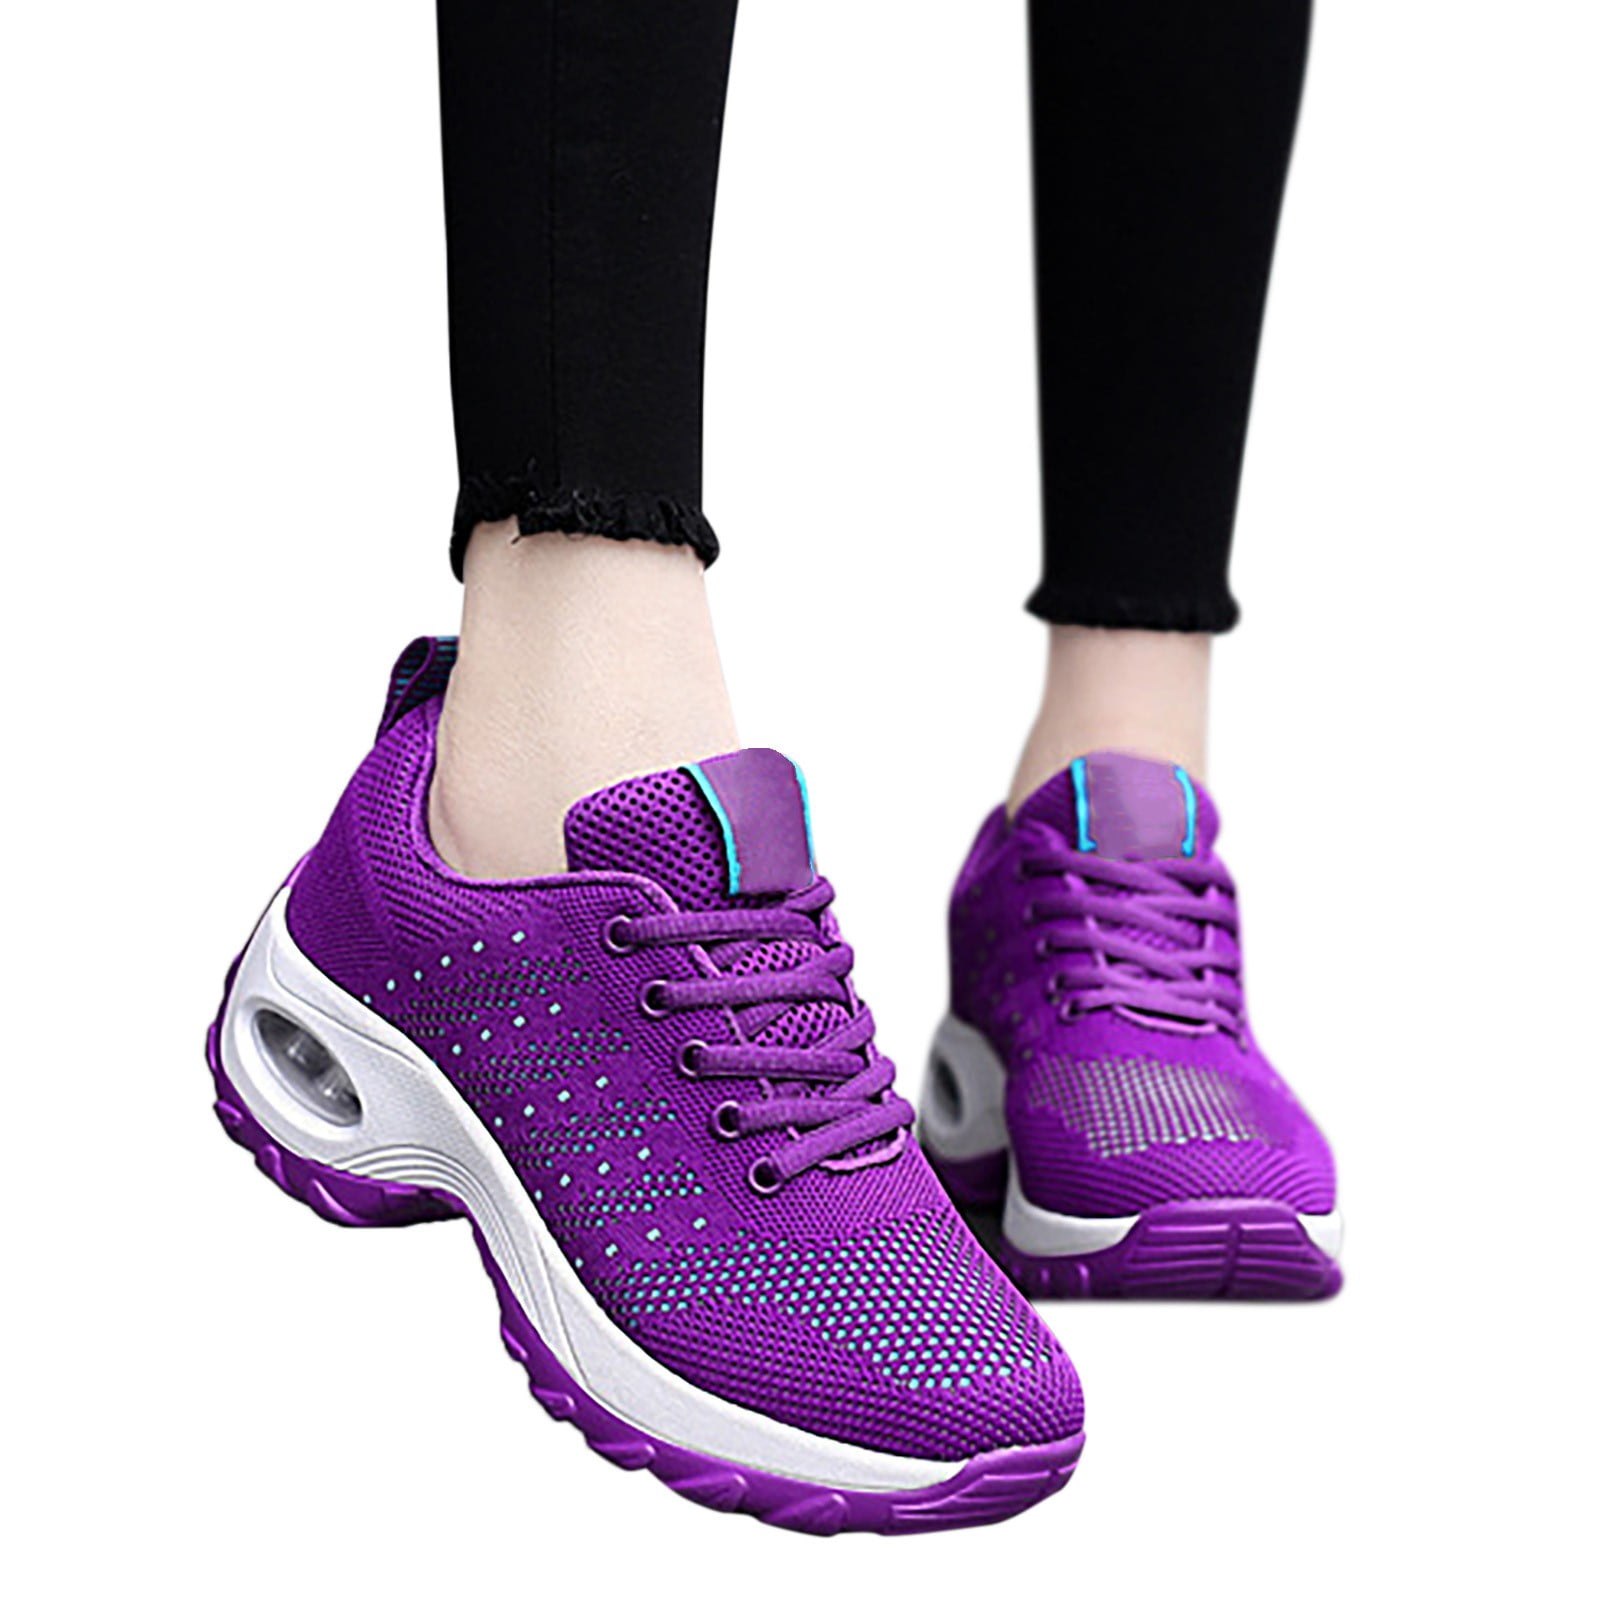 Cathalem Nice Design Women Ladies Breathable Mesh Air Cushion Mesh Casual  Lightweight Soft Bottom Shoes Womens Casual Comfort Purple 8 